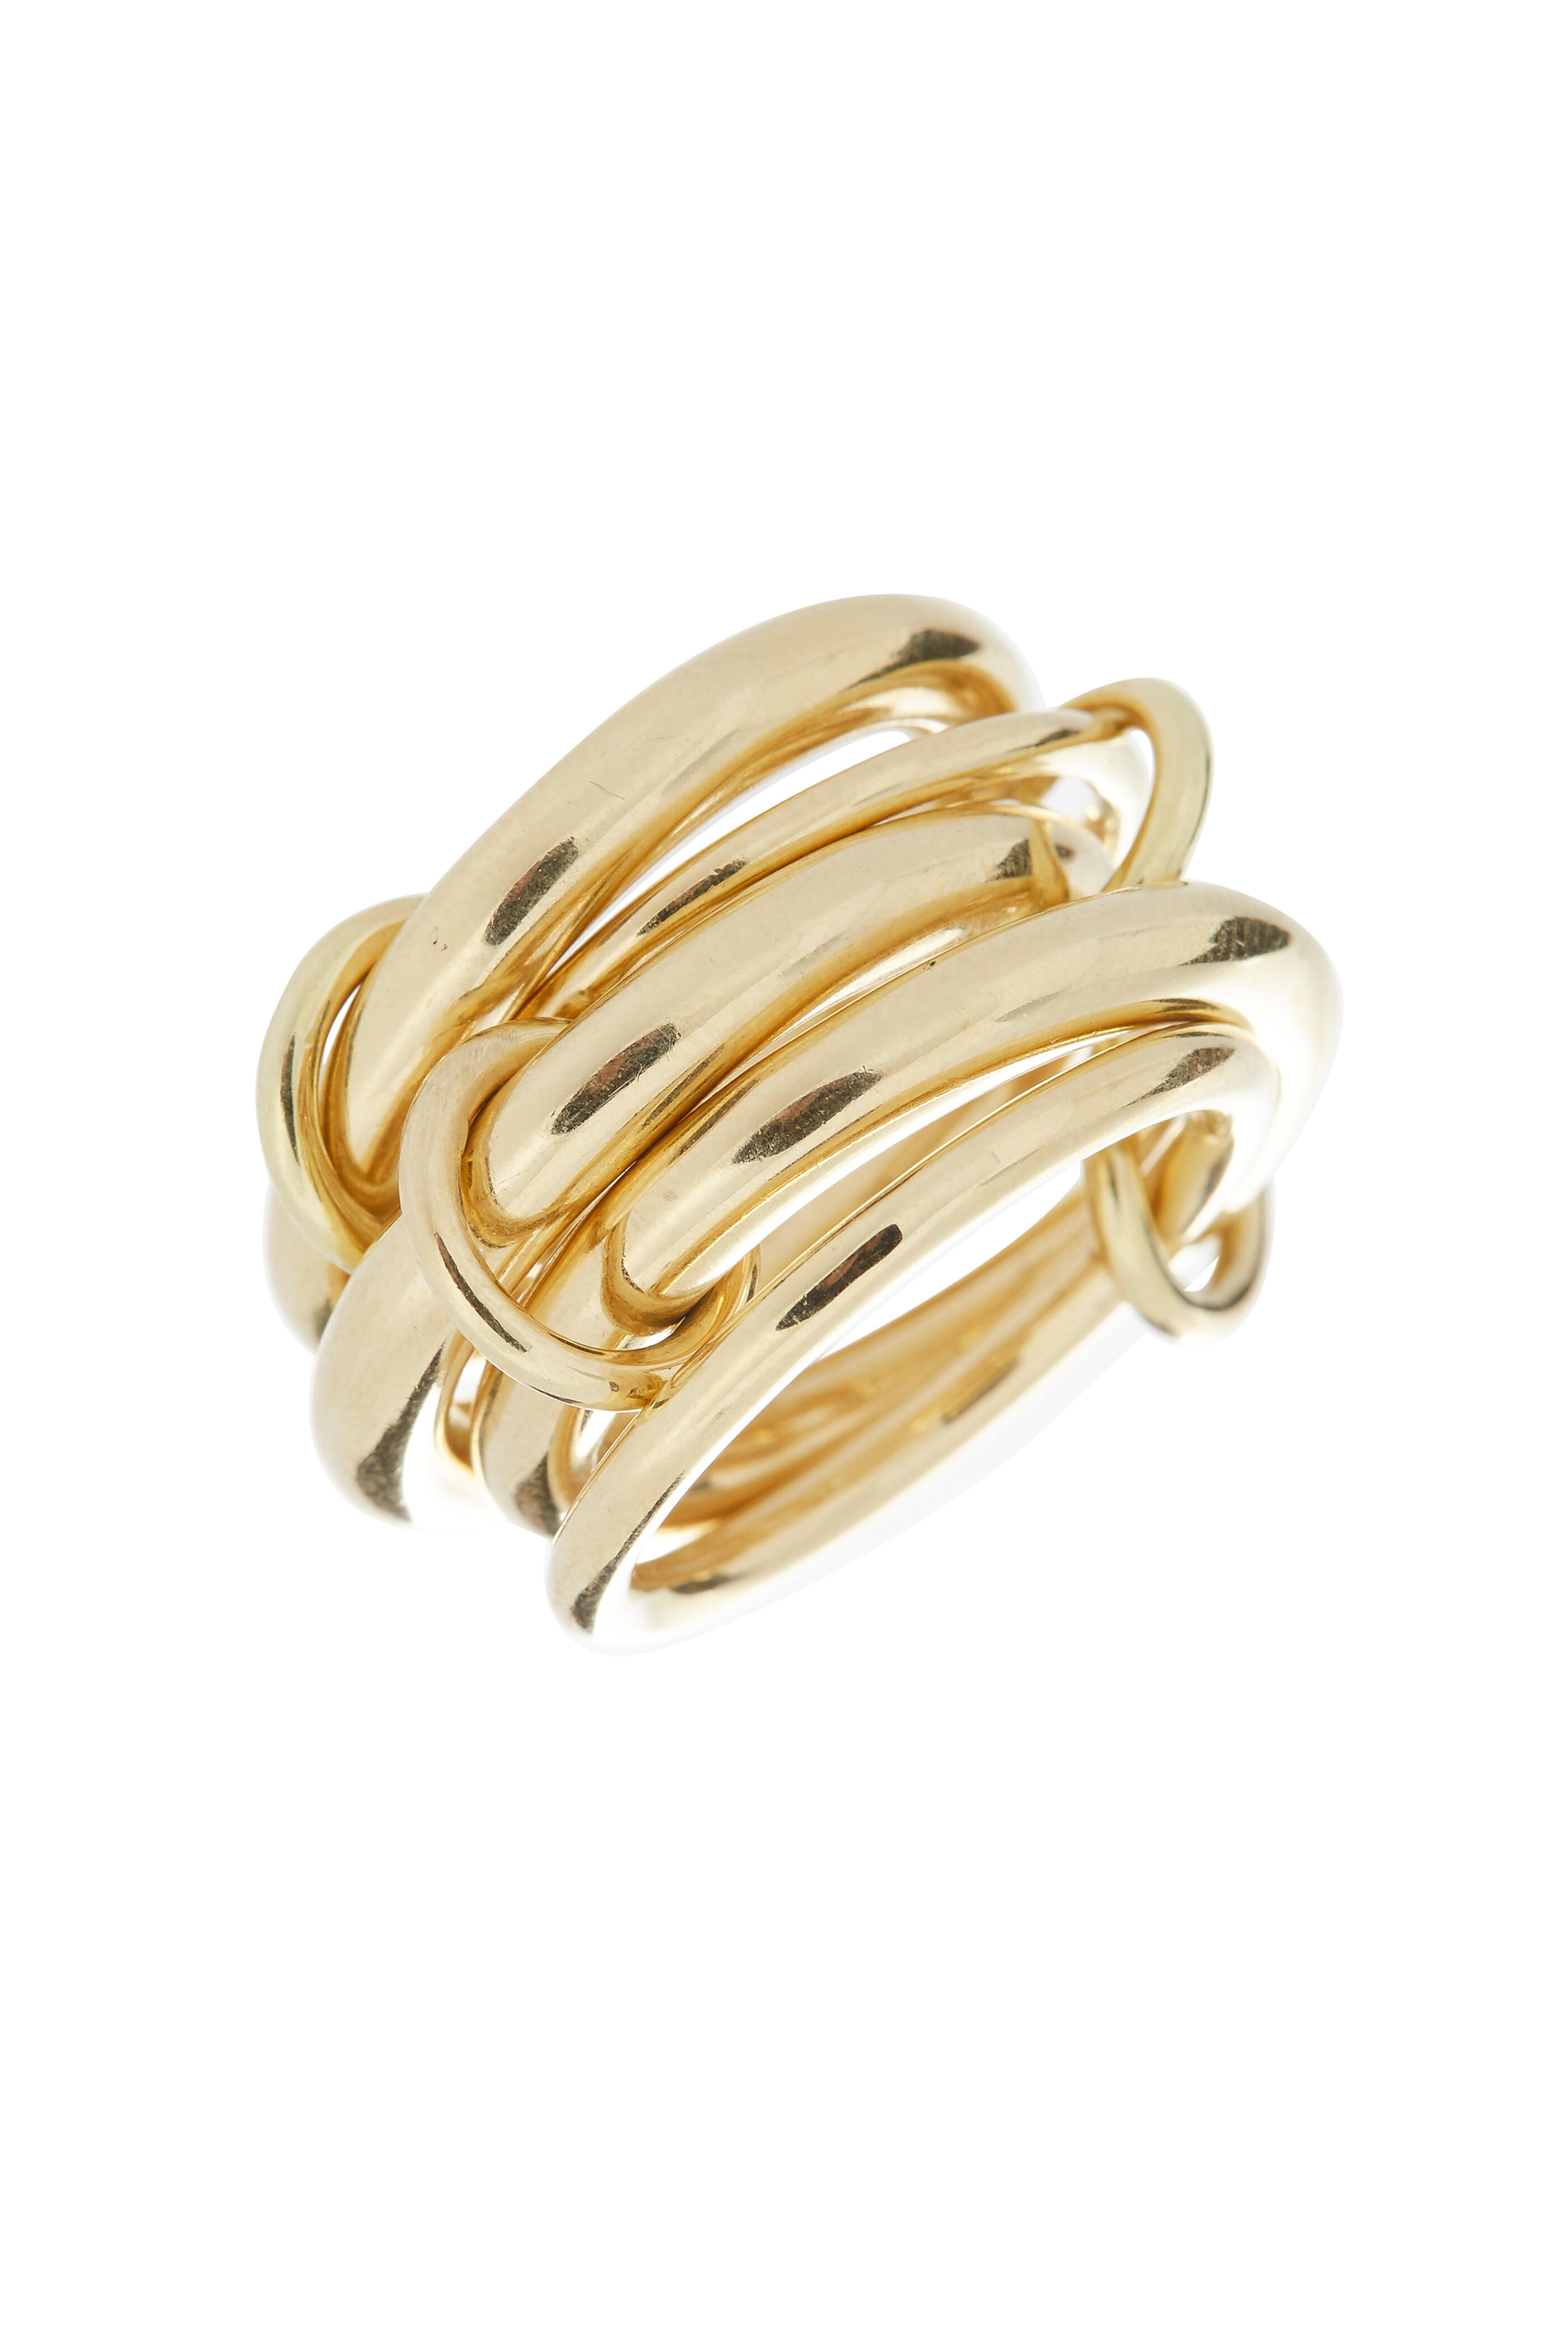 Spinelli Kilcollin 18K yellow gold linked rings